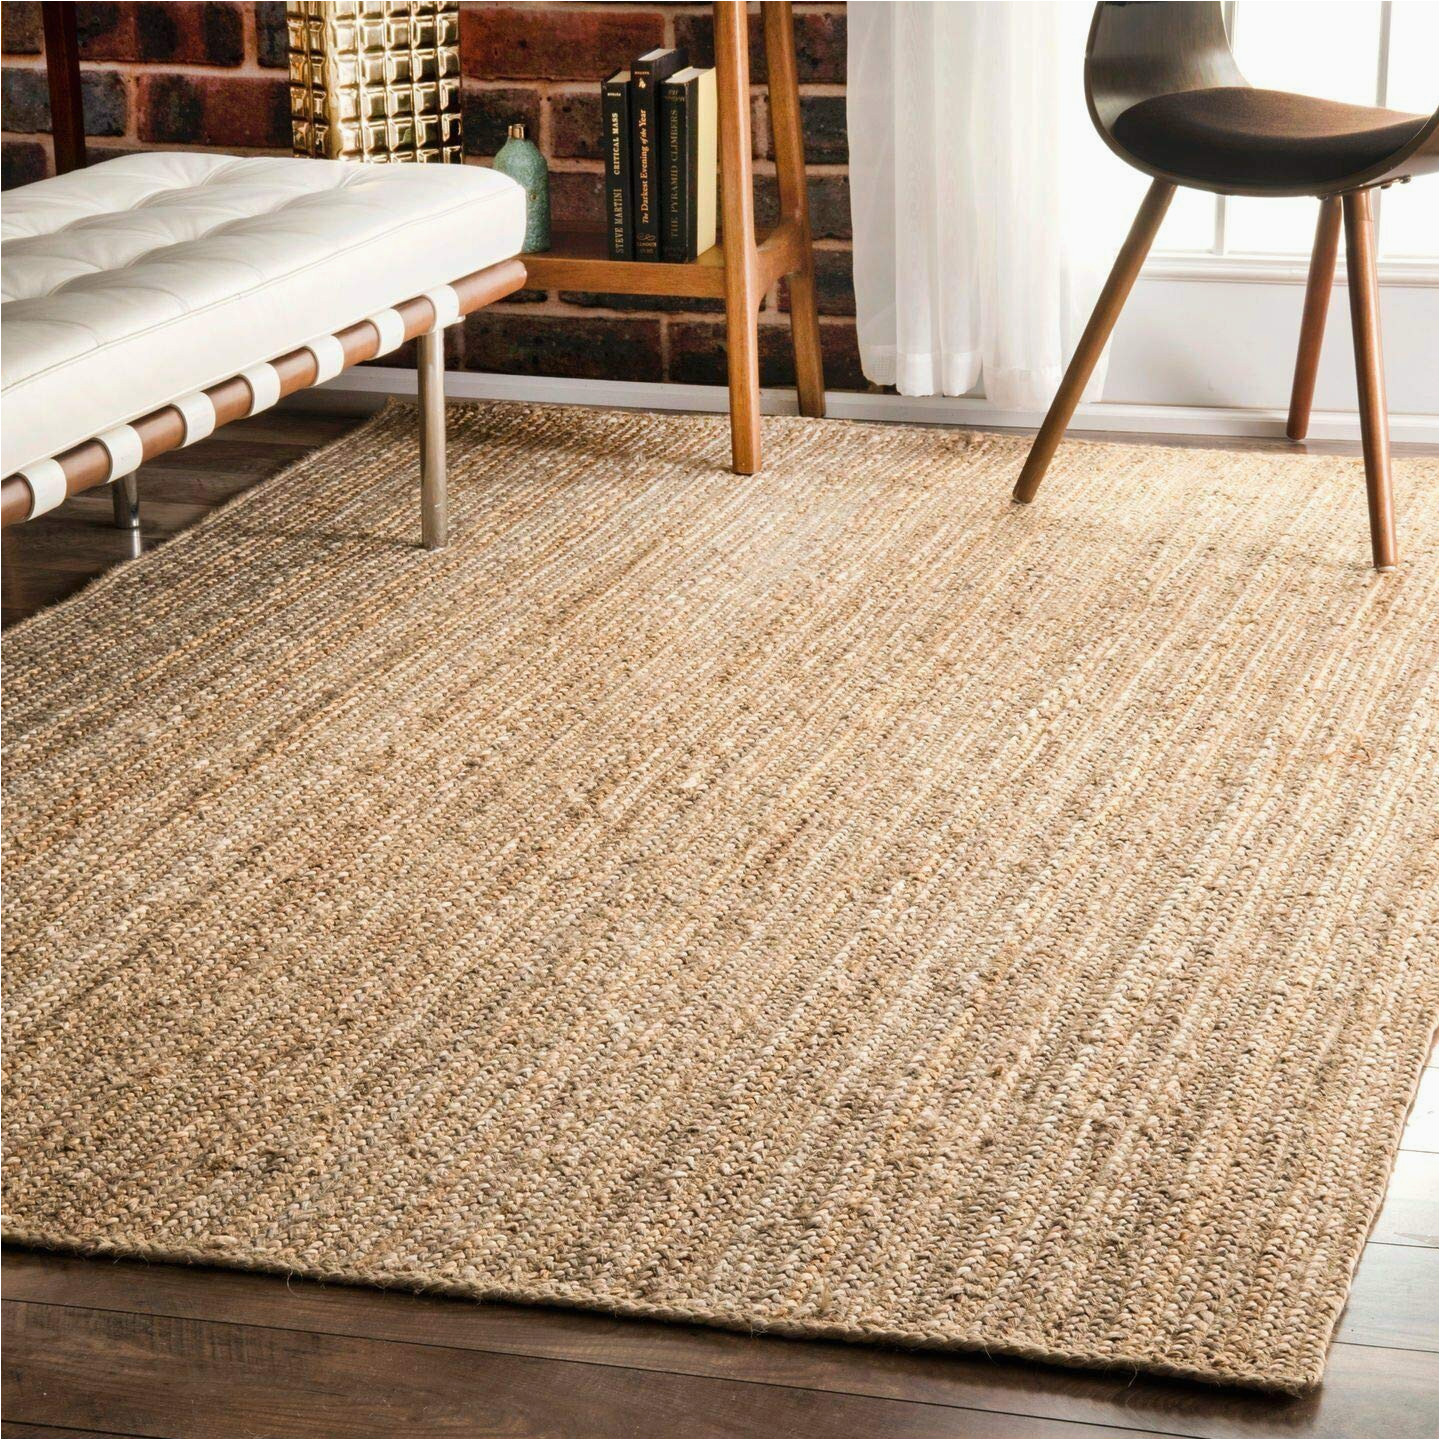 12 by 14 Foot area Rugs Frelish Decor Handwoven Jute area Rug- 10×14 Feet Natural Yarn- Rustic Vintage Beige Braided Reversible Rectangular Rugs for Bedroom, Kitchen, Living …